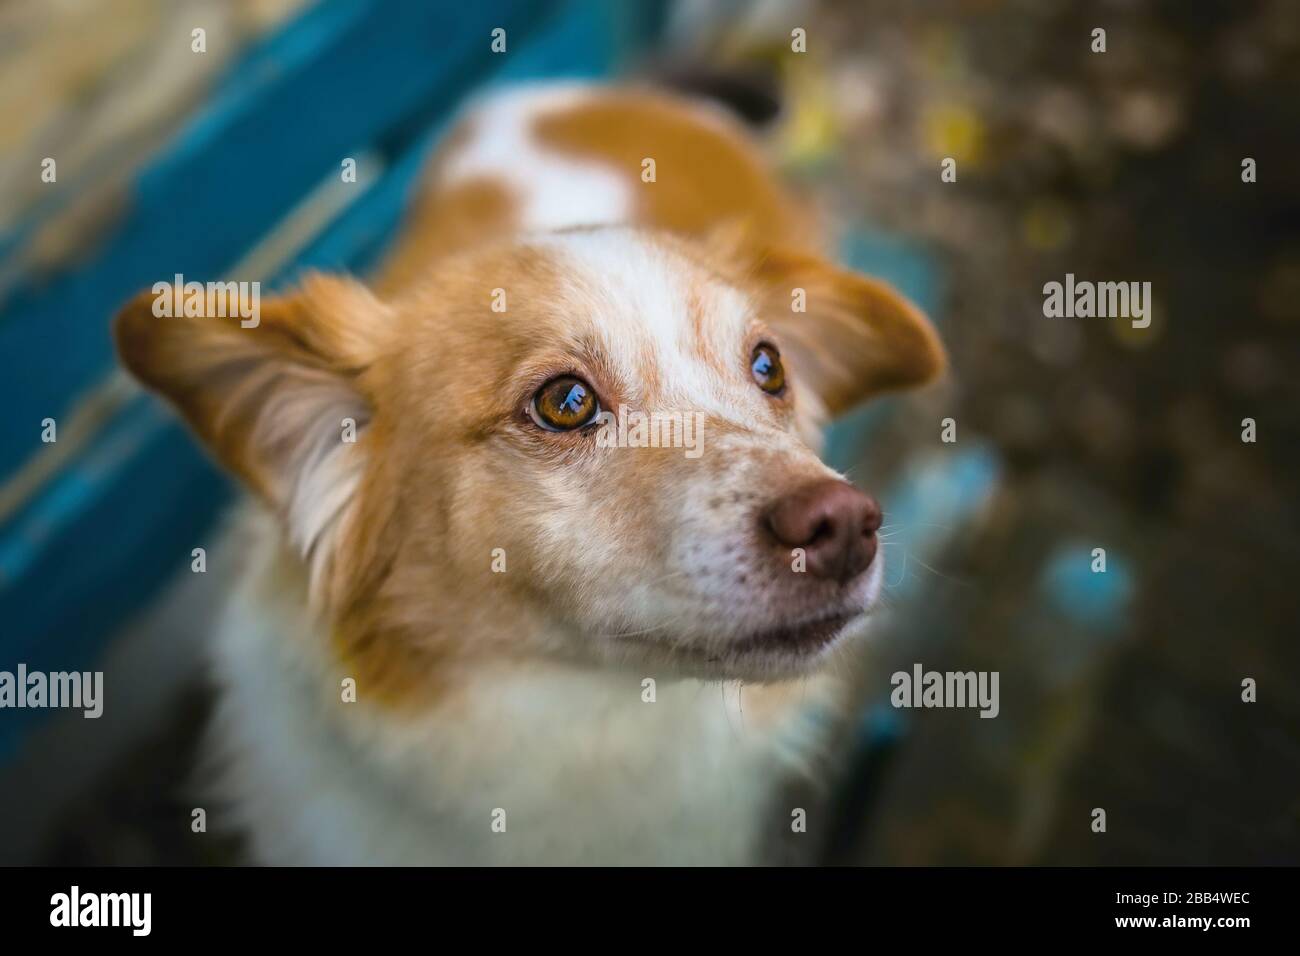 Close up portrait of a cute mixed breed brown and white dog standing on a blue bench looking up. A day in a park. Stock Photo